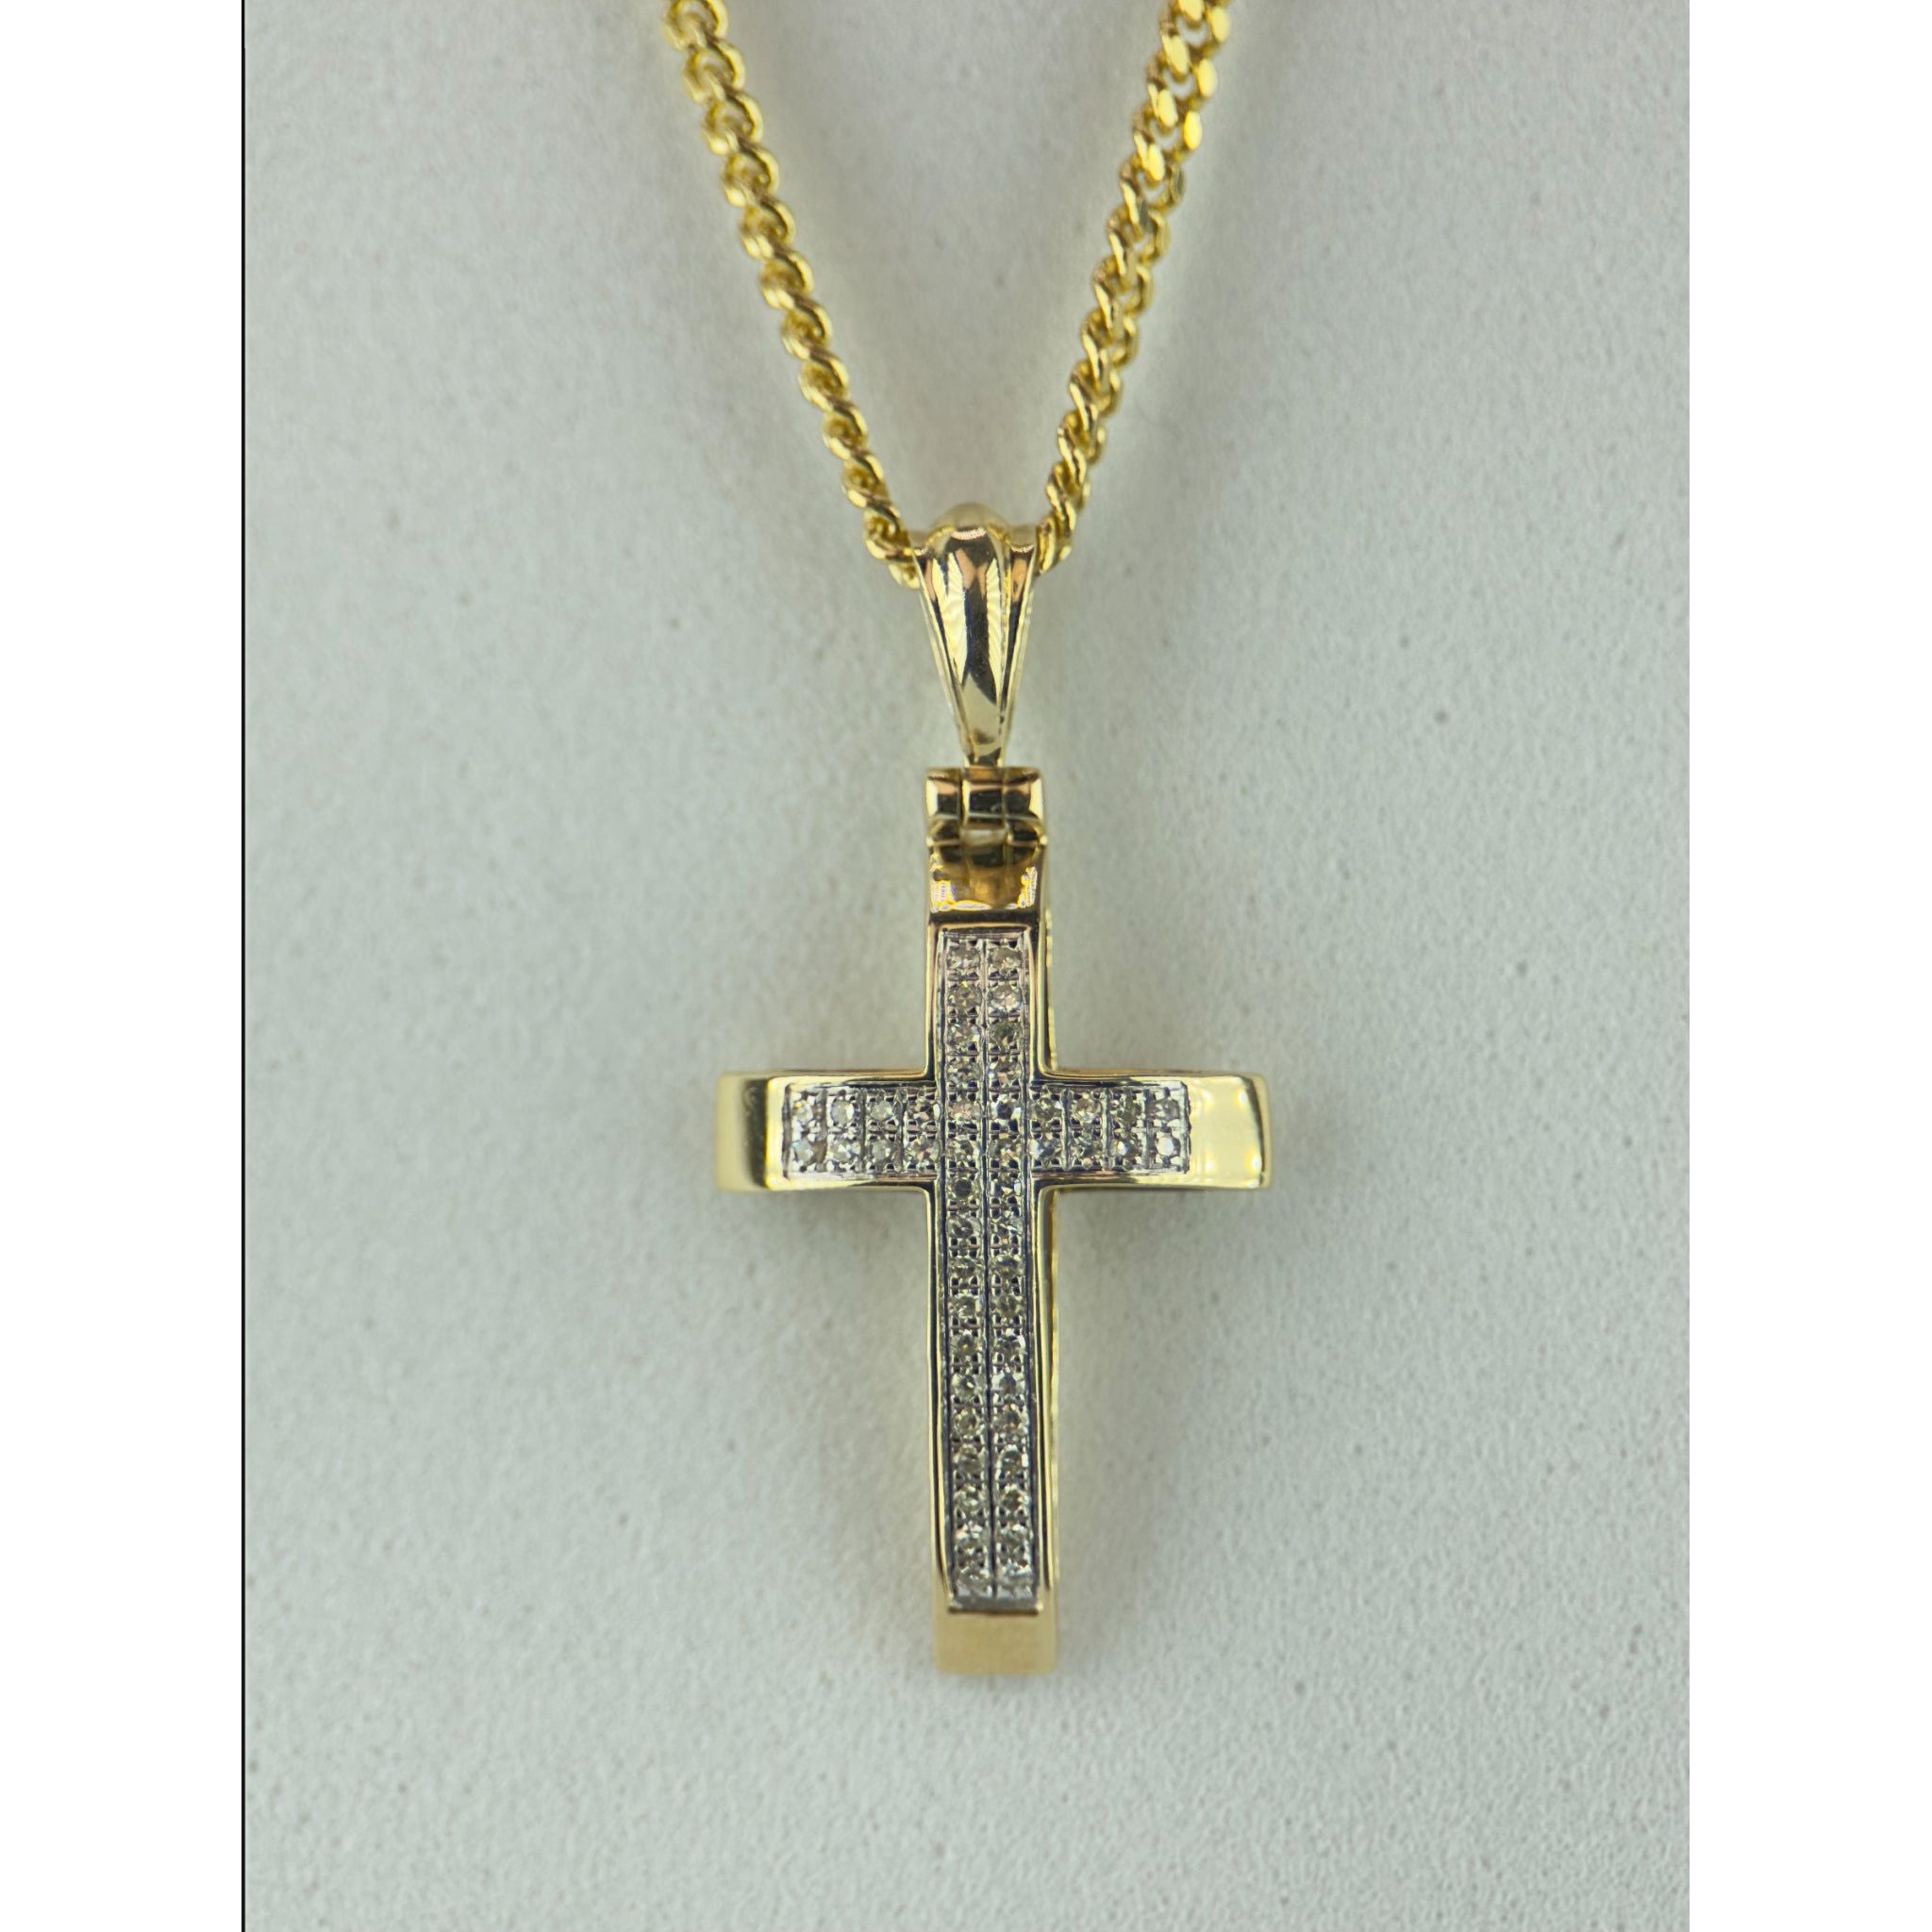 DR2212 - 14K Yellow Gold - Diamond - Pendant and Chain